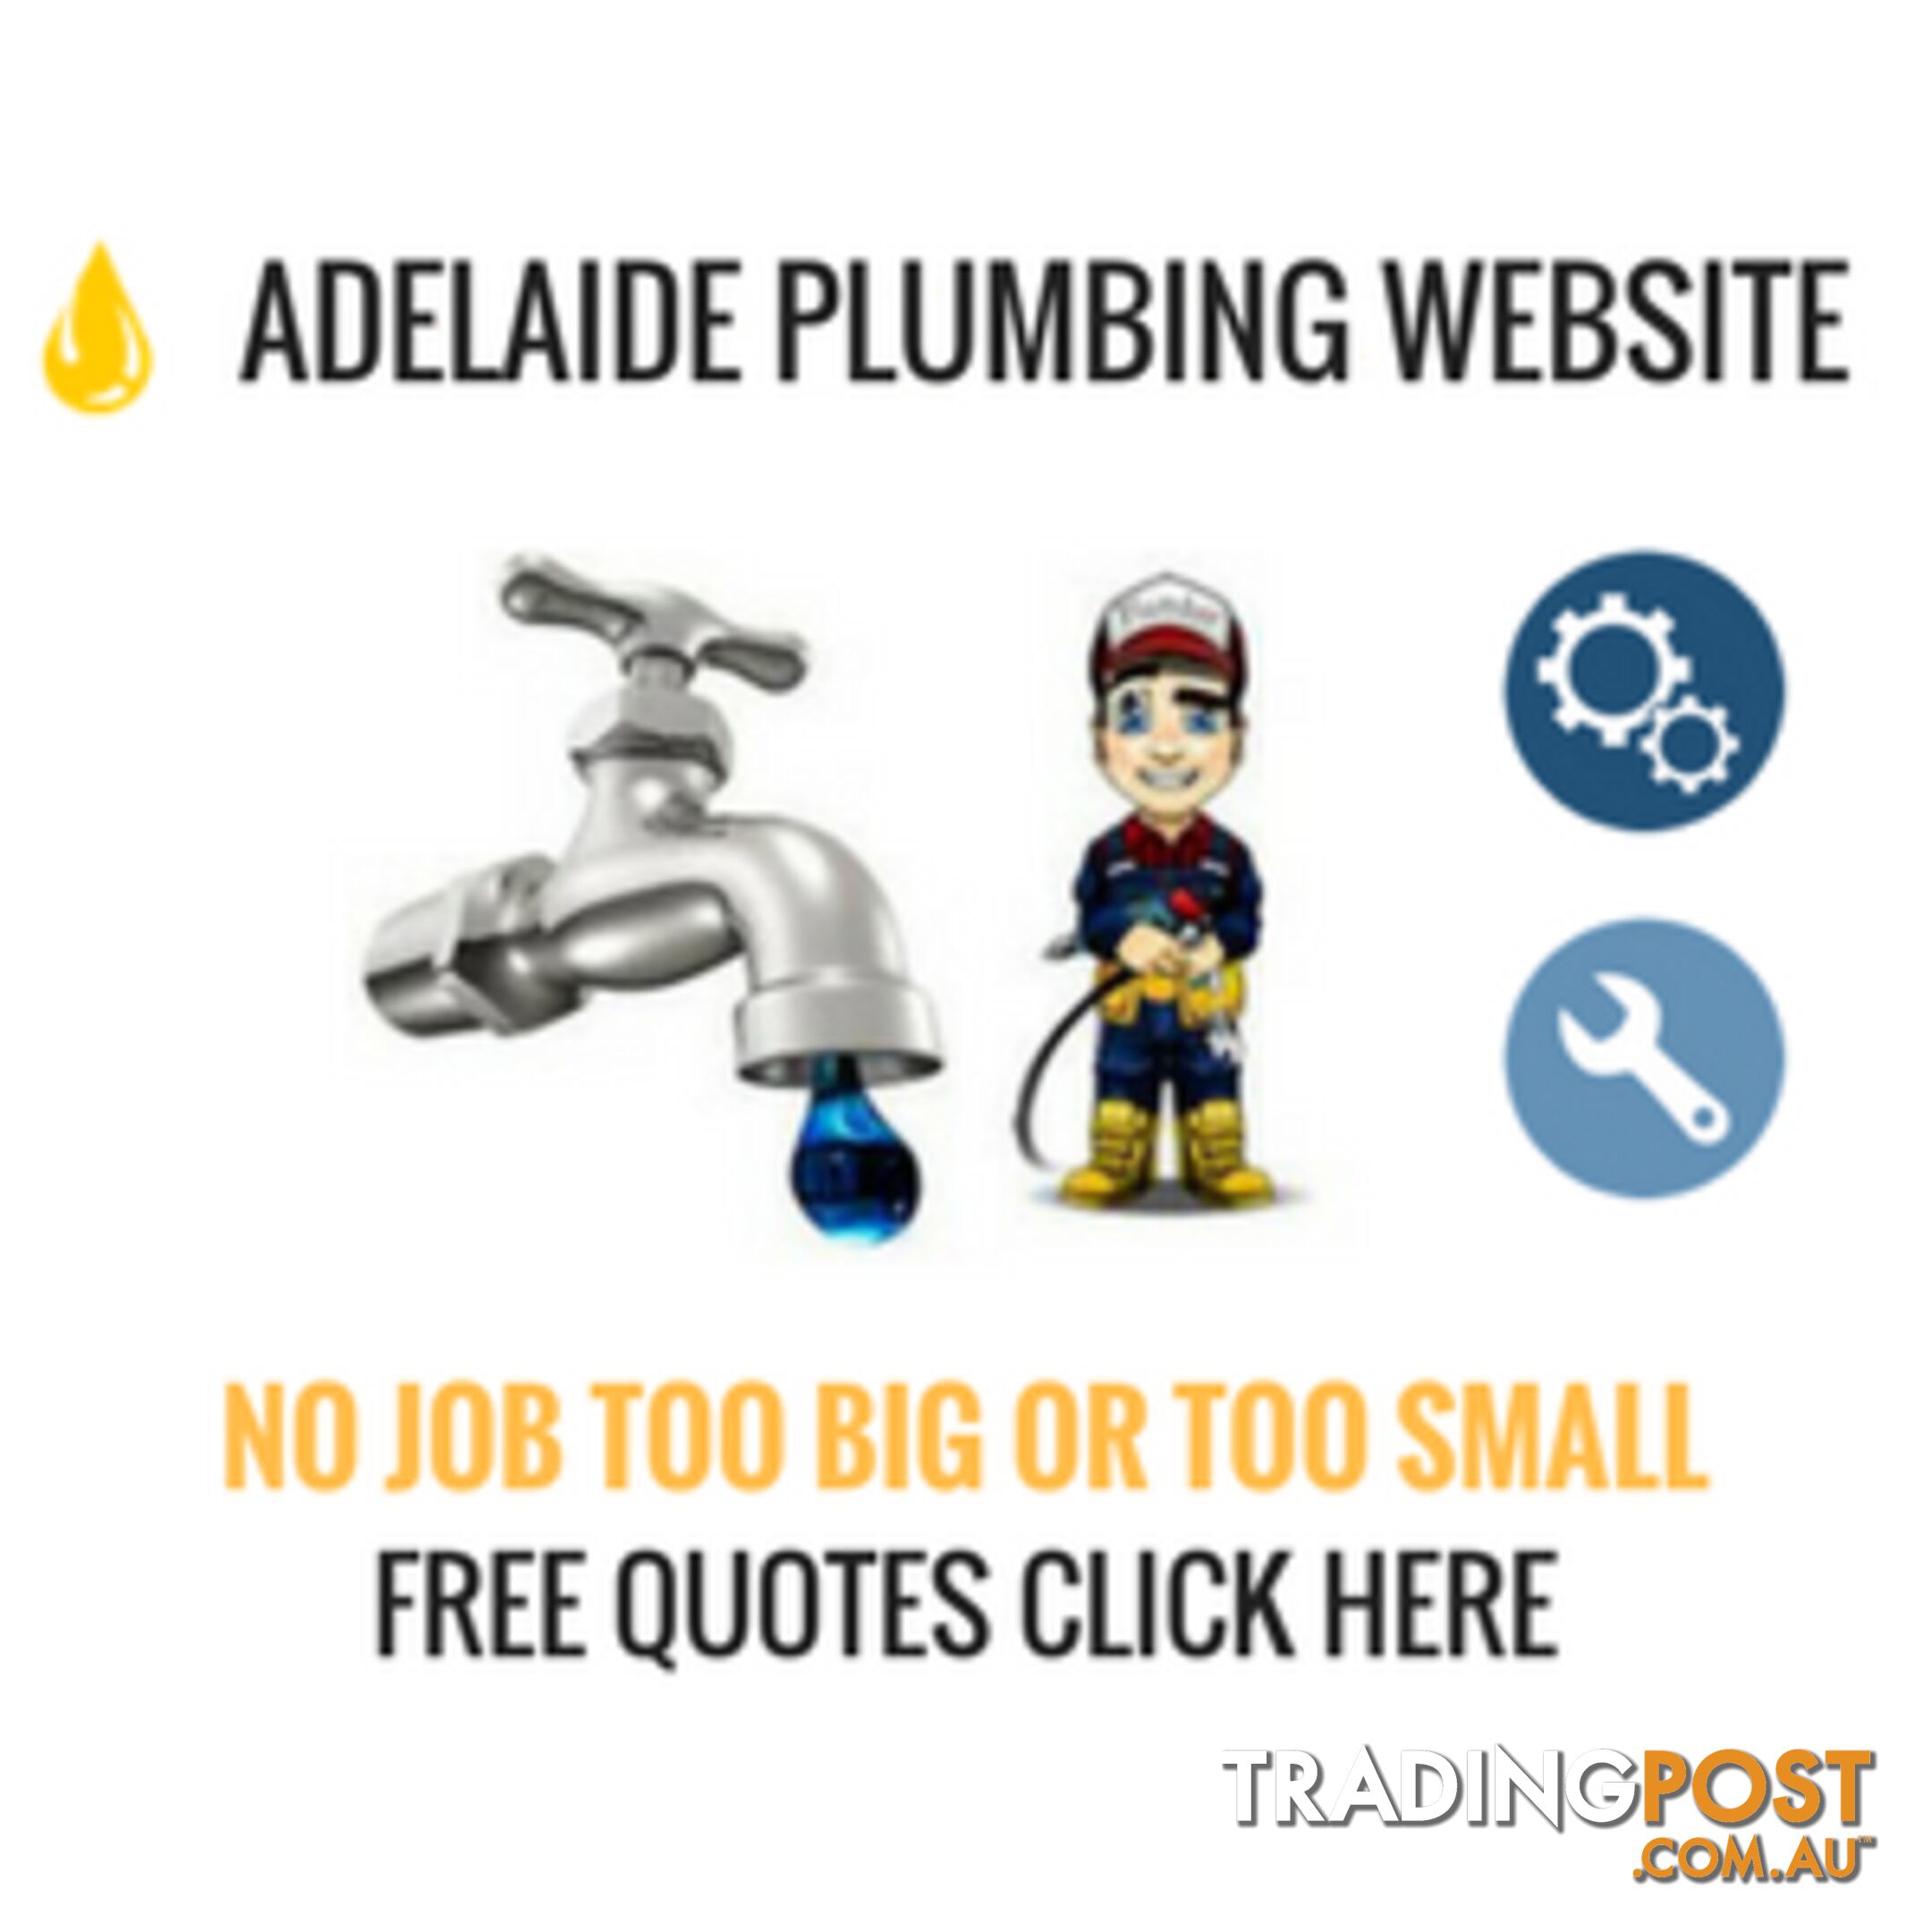 Plumbers - Need More Customers? Rent A Lead Generating Website & Domain from $15pw  Why put off gett